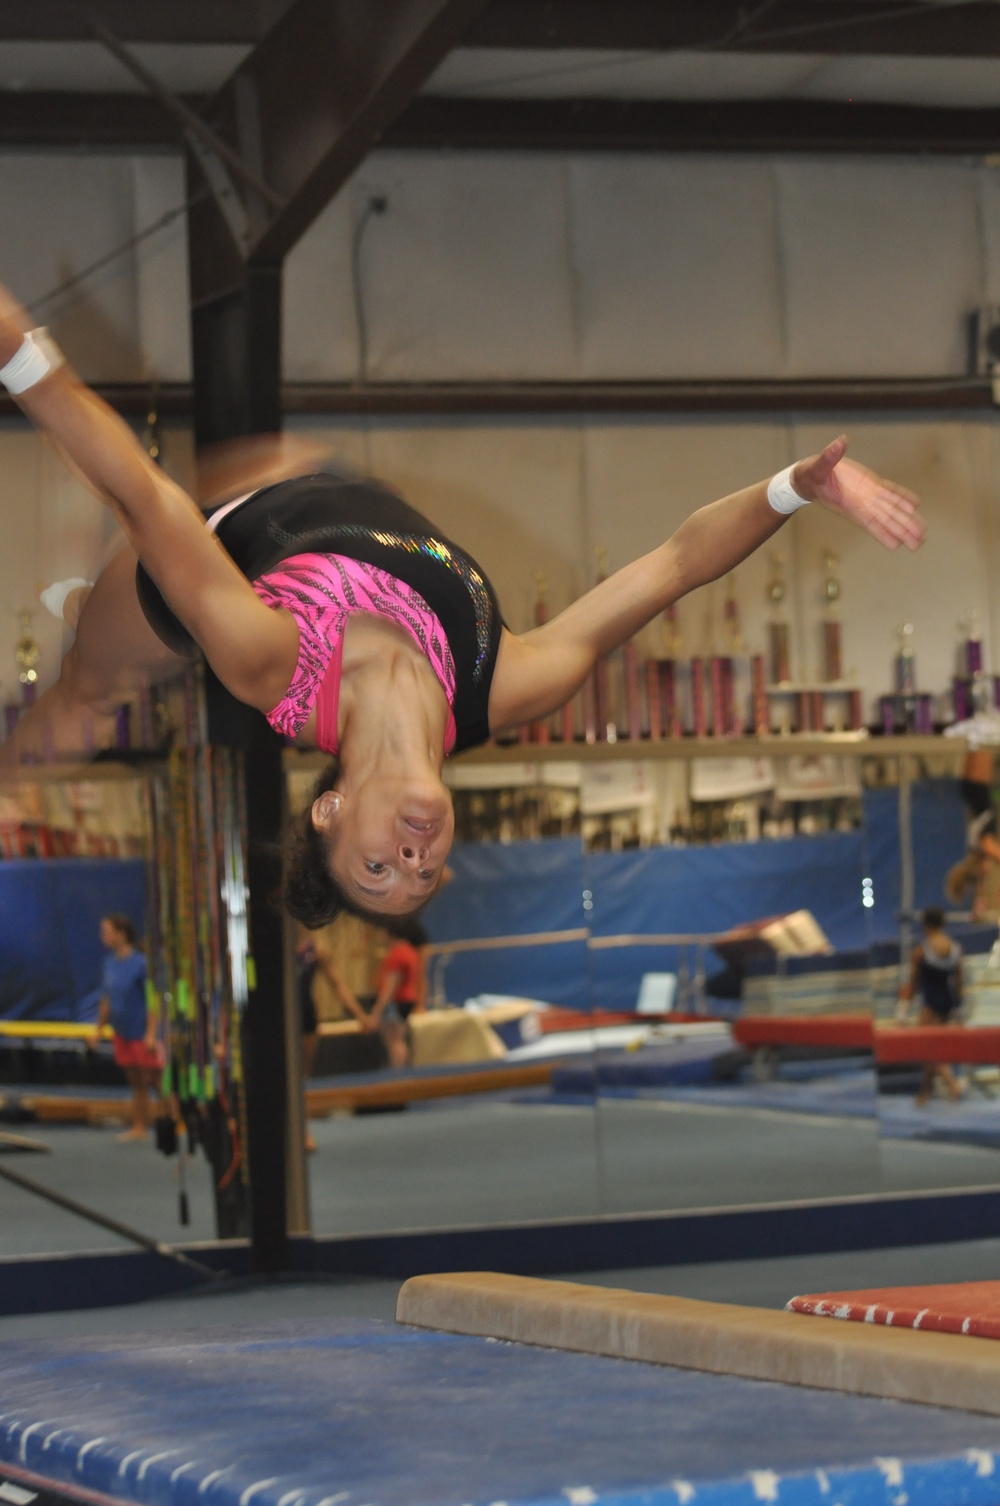 In pursuit of success: Gymnast's grit, determination opens doors of opportunity